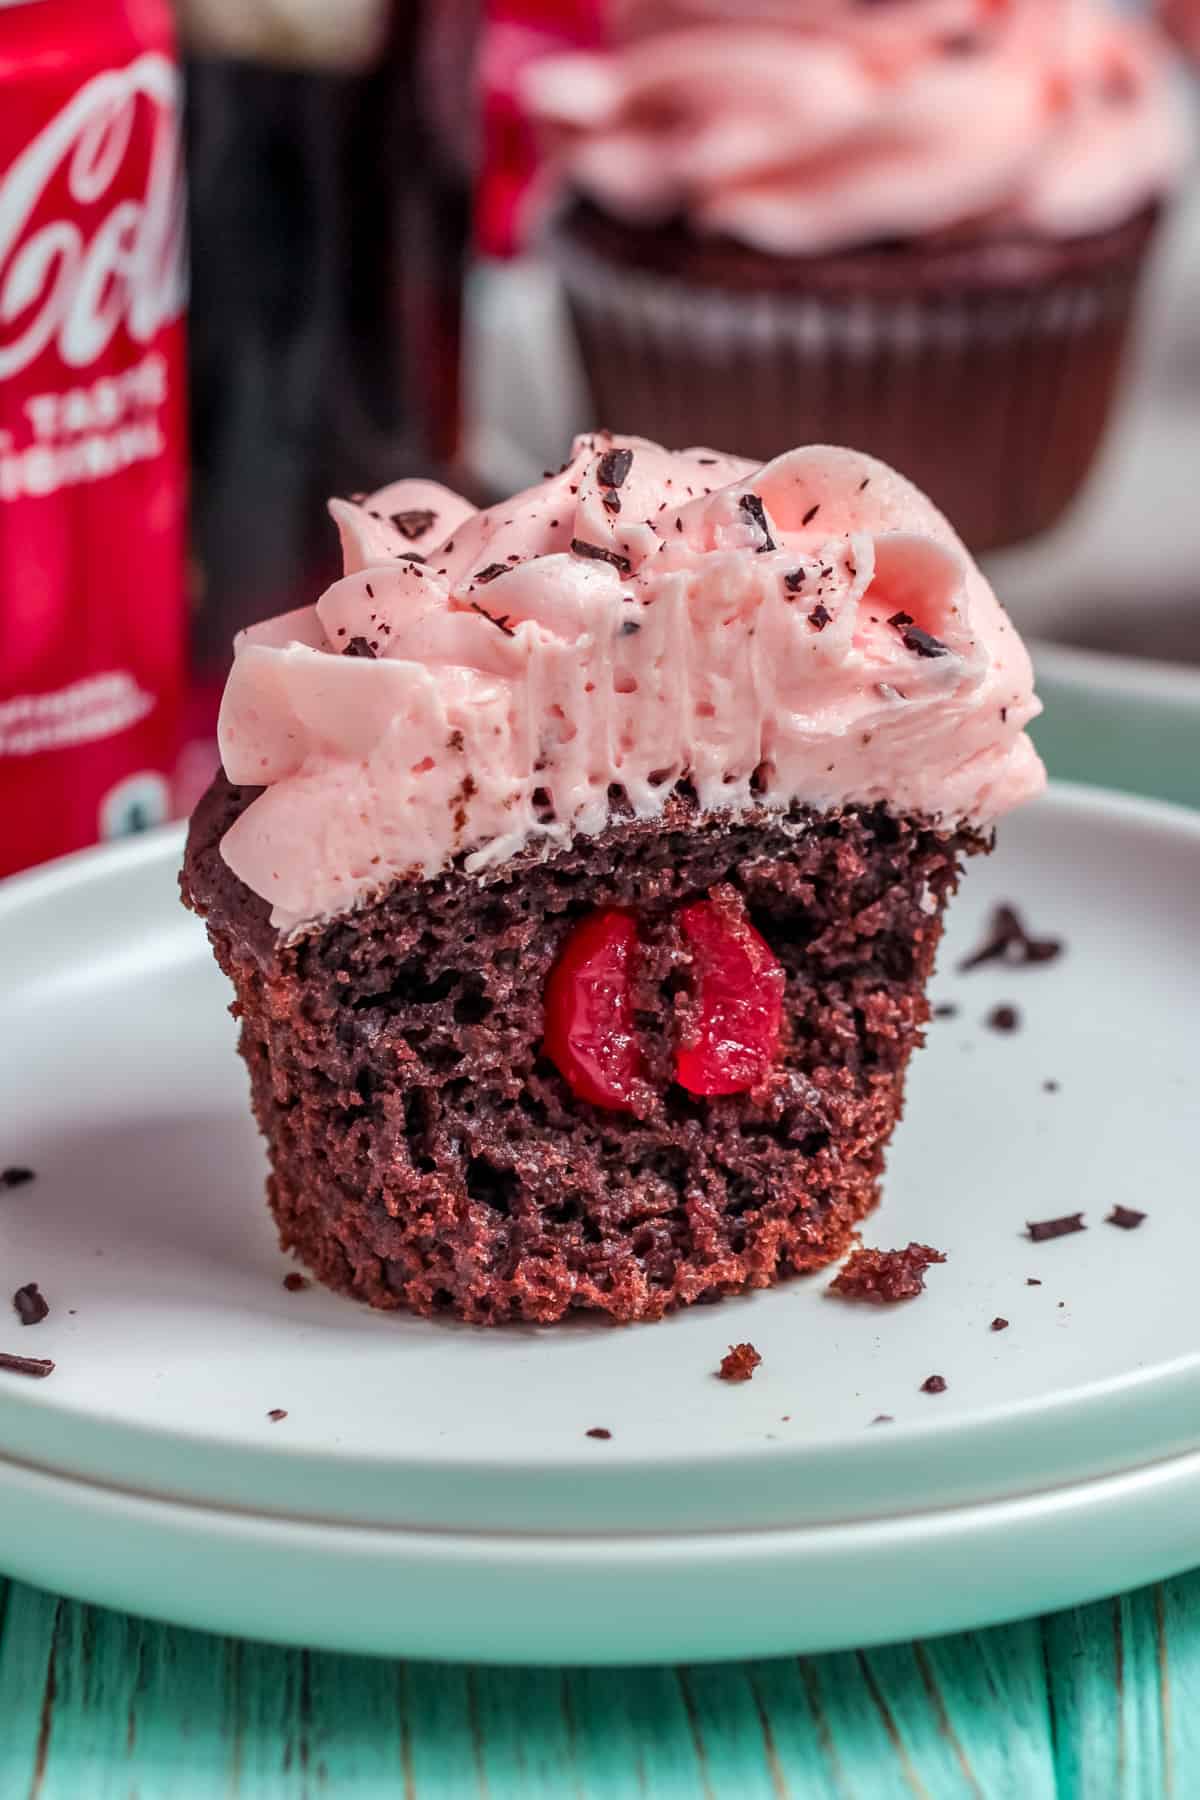 One of the Cherry Coke Cupcakes cut in half on plate showing cherry in center.